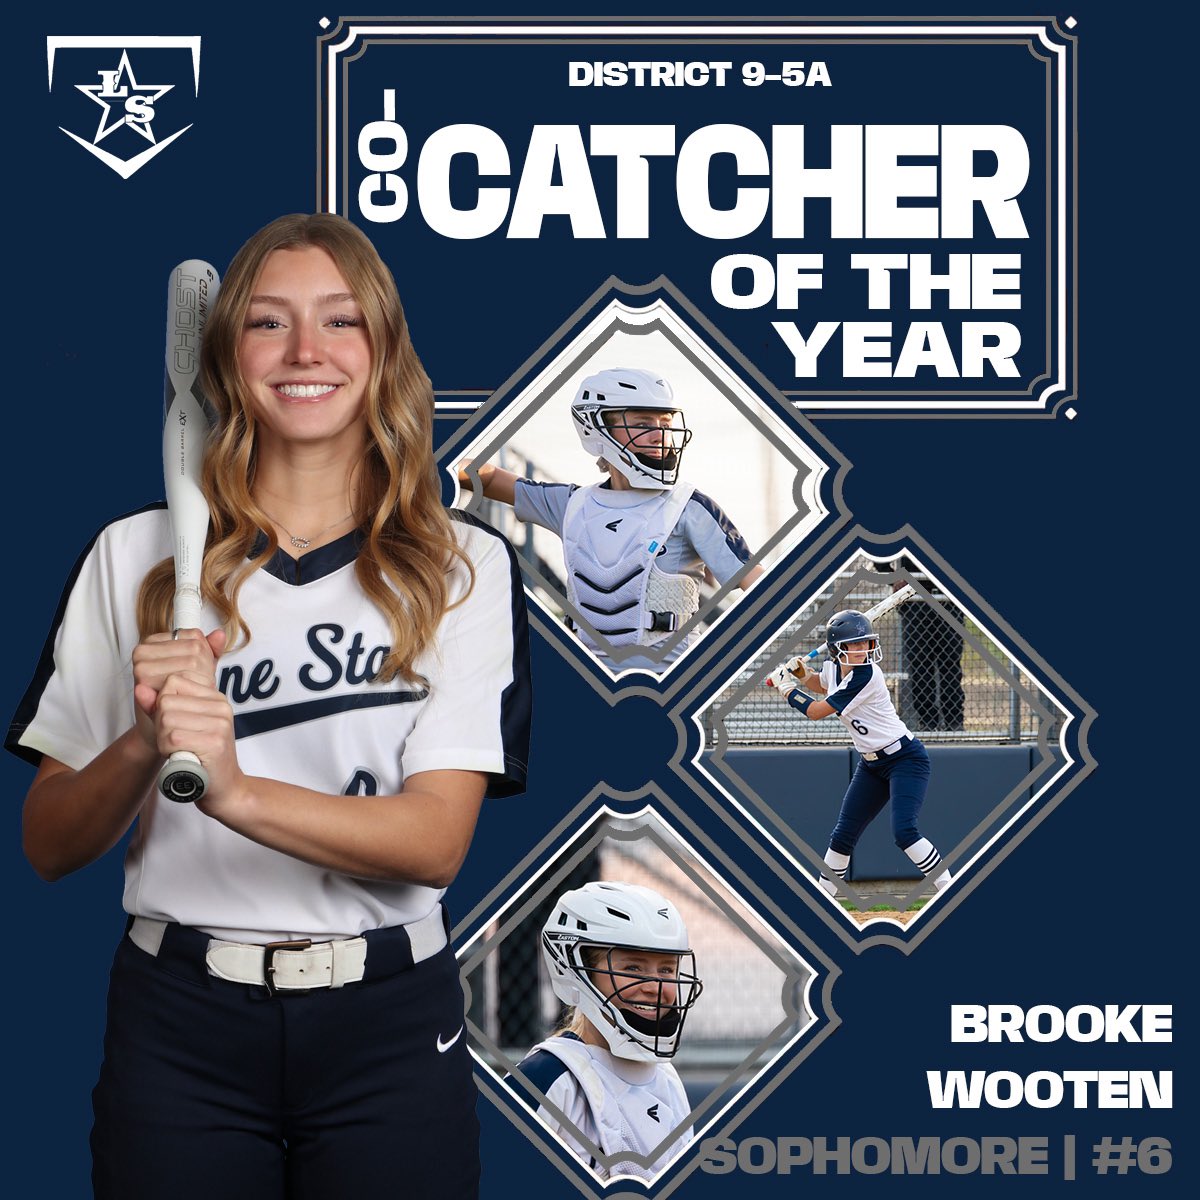 Congratulations to Sophomore Brooke Wooten for being named 𝐃𝐢𝐬𝐭𝐫𝐢𝐜𝐭 𝟗-𝟓𝐀 𝐂𝐨-𝐂𝐚𝐭𝐜𝐡𝐞𝐫 𝐨𝐟 𝐭𝐡𝐞 𝐘𝐞𝐚𝐫 🤠 #RaiseTheShips | #SDLUP